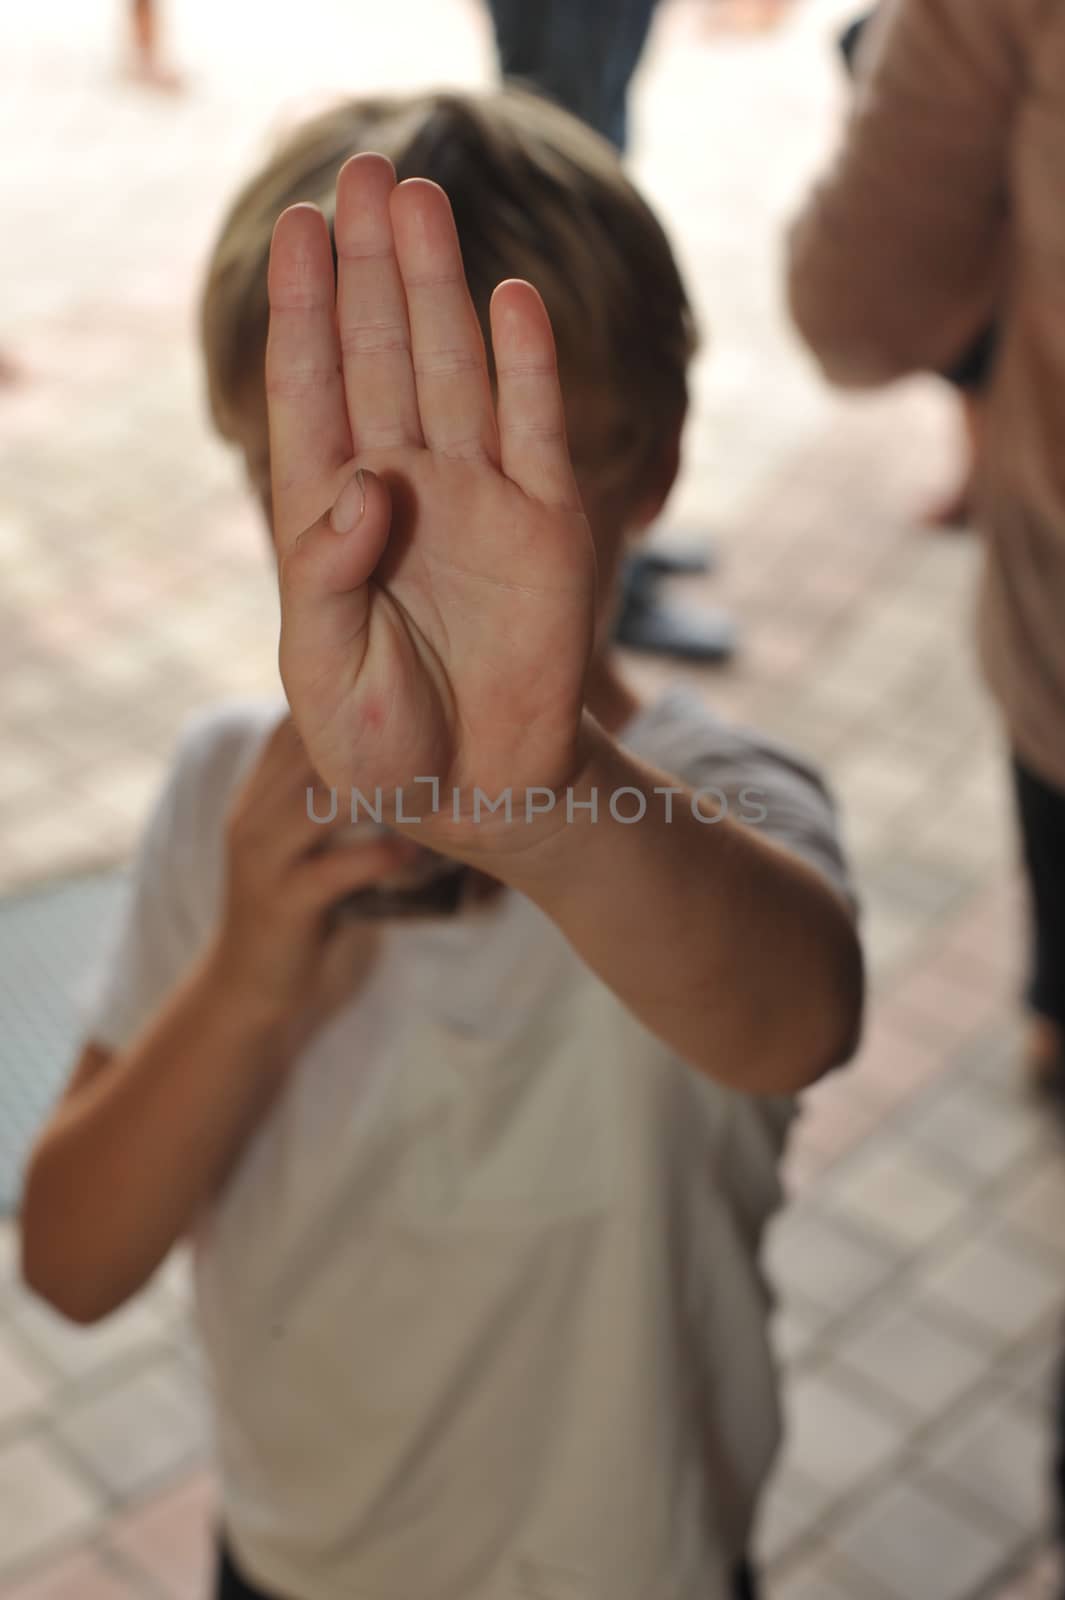 Boy Saying Stop With His Hand